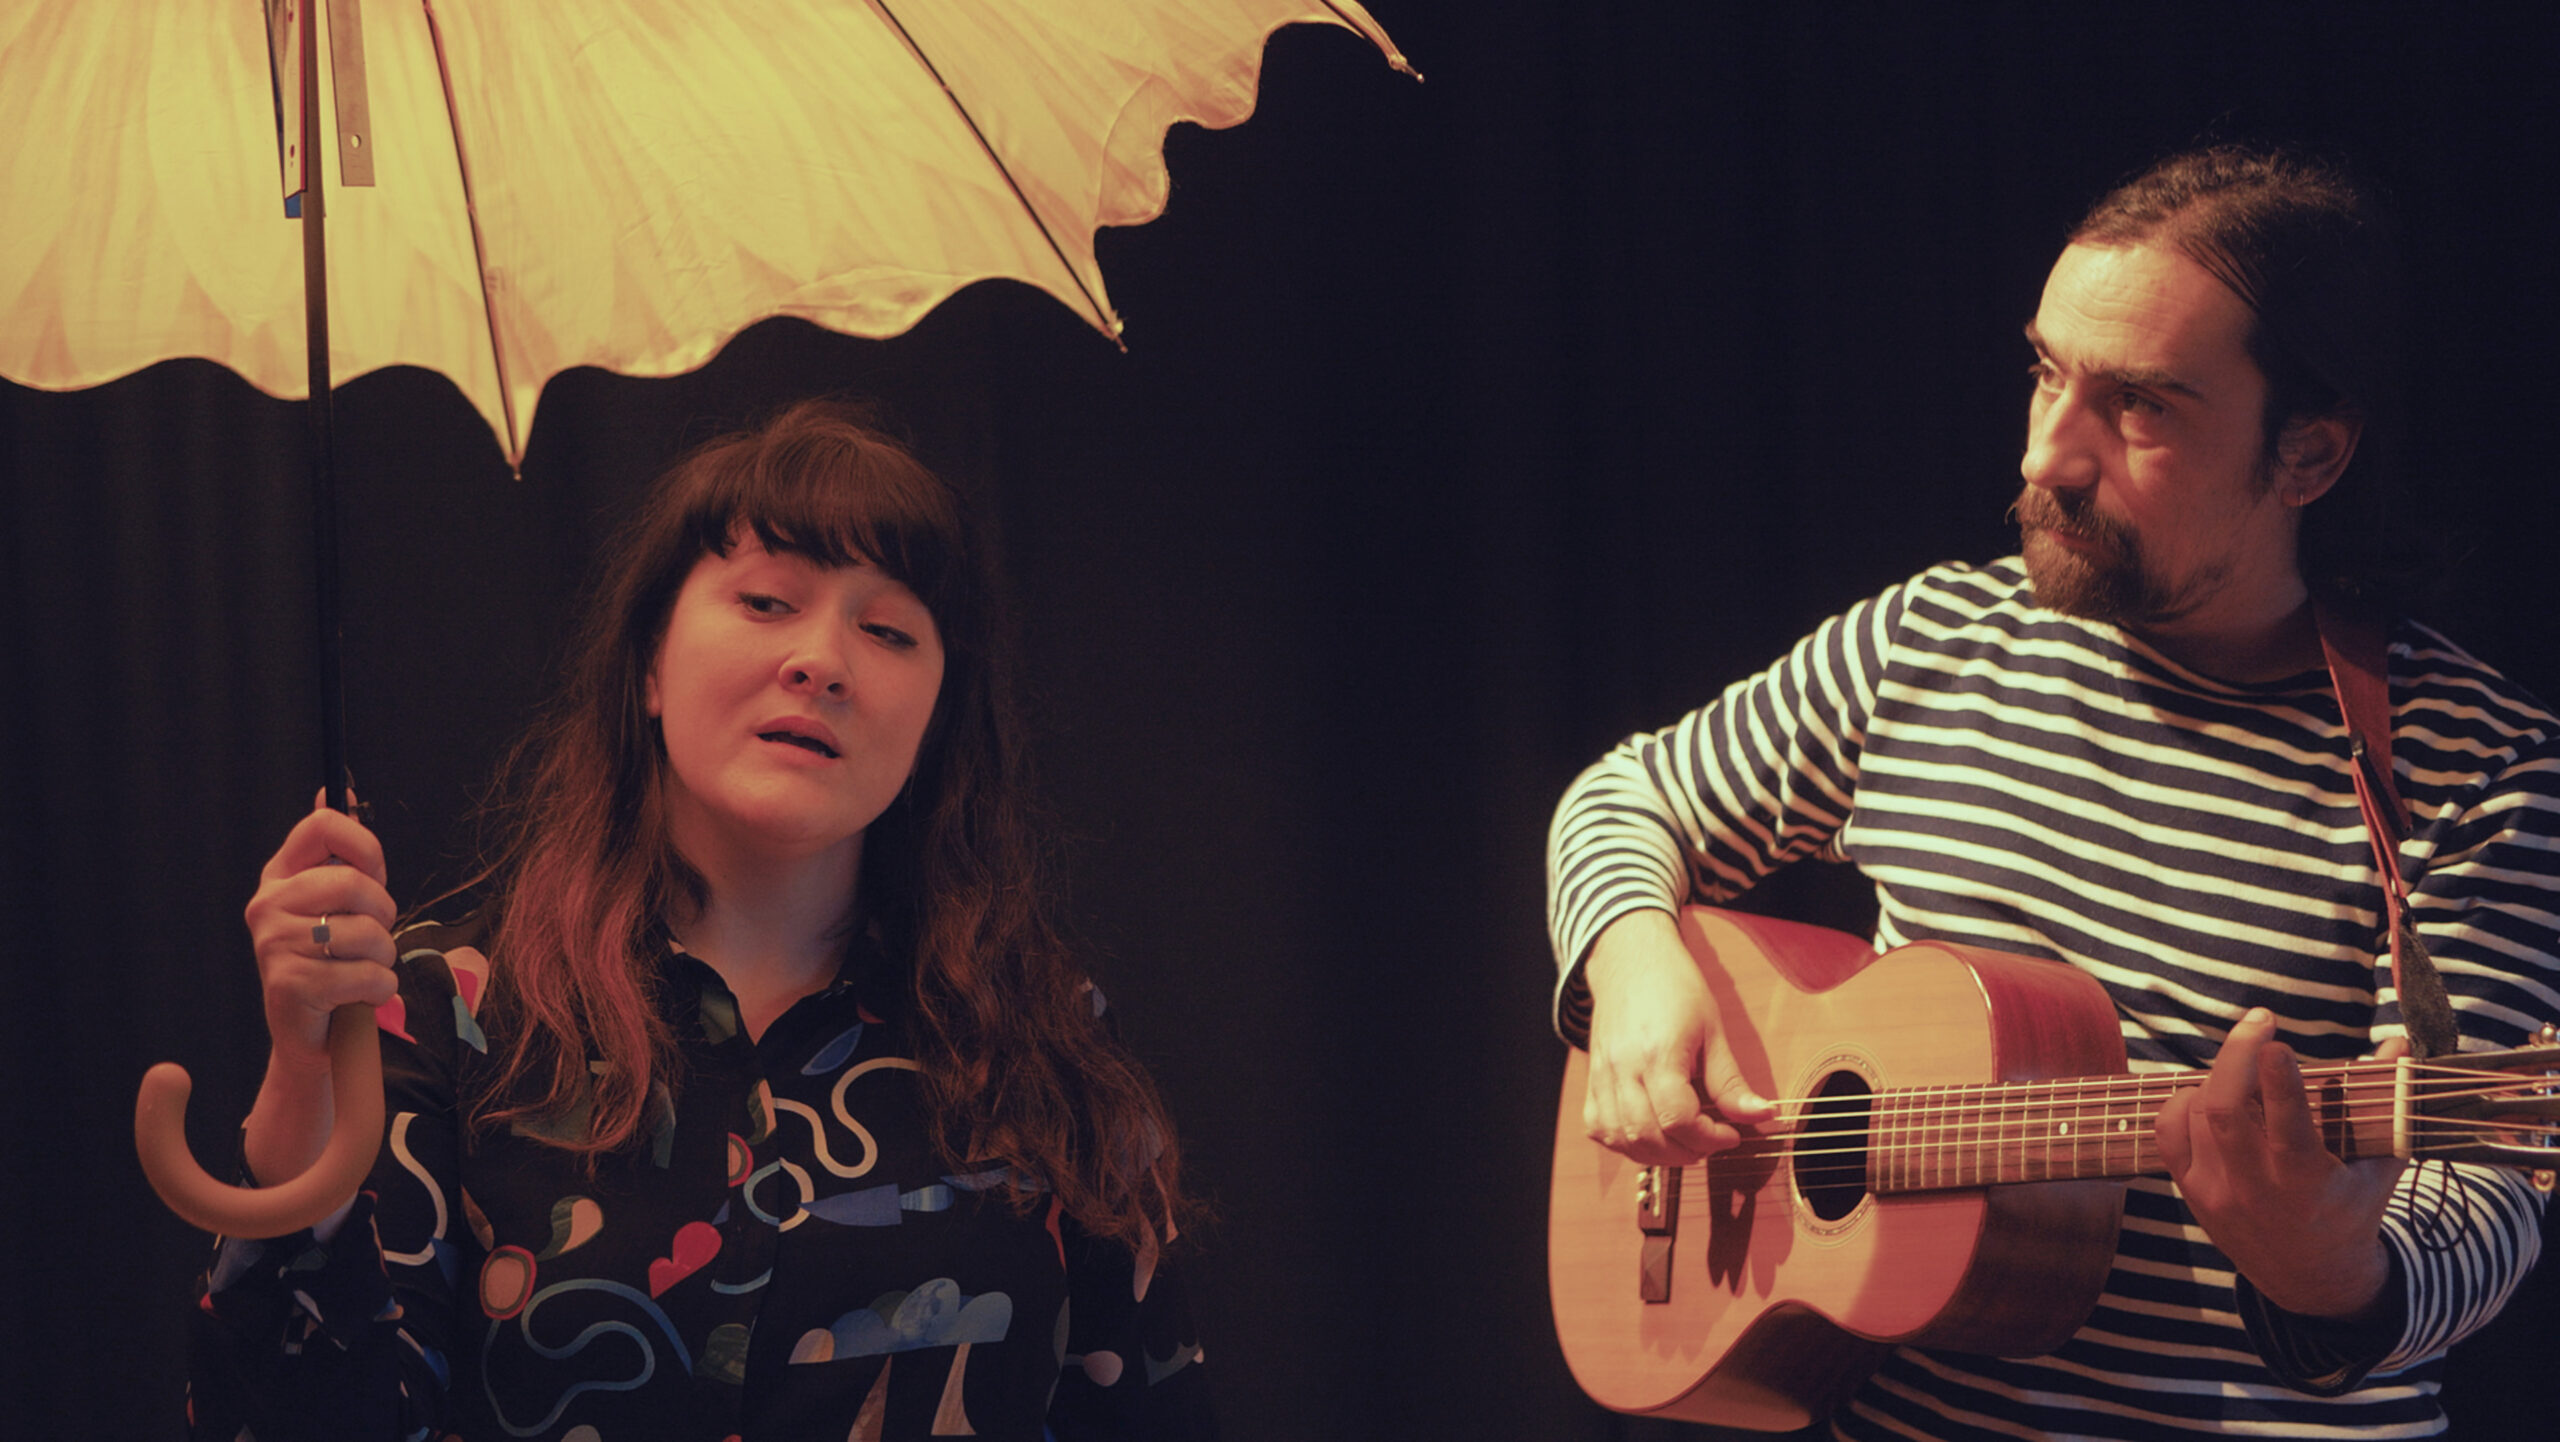 An image of two people. one person holding an umbrella and one person playing a guitar.